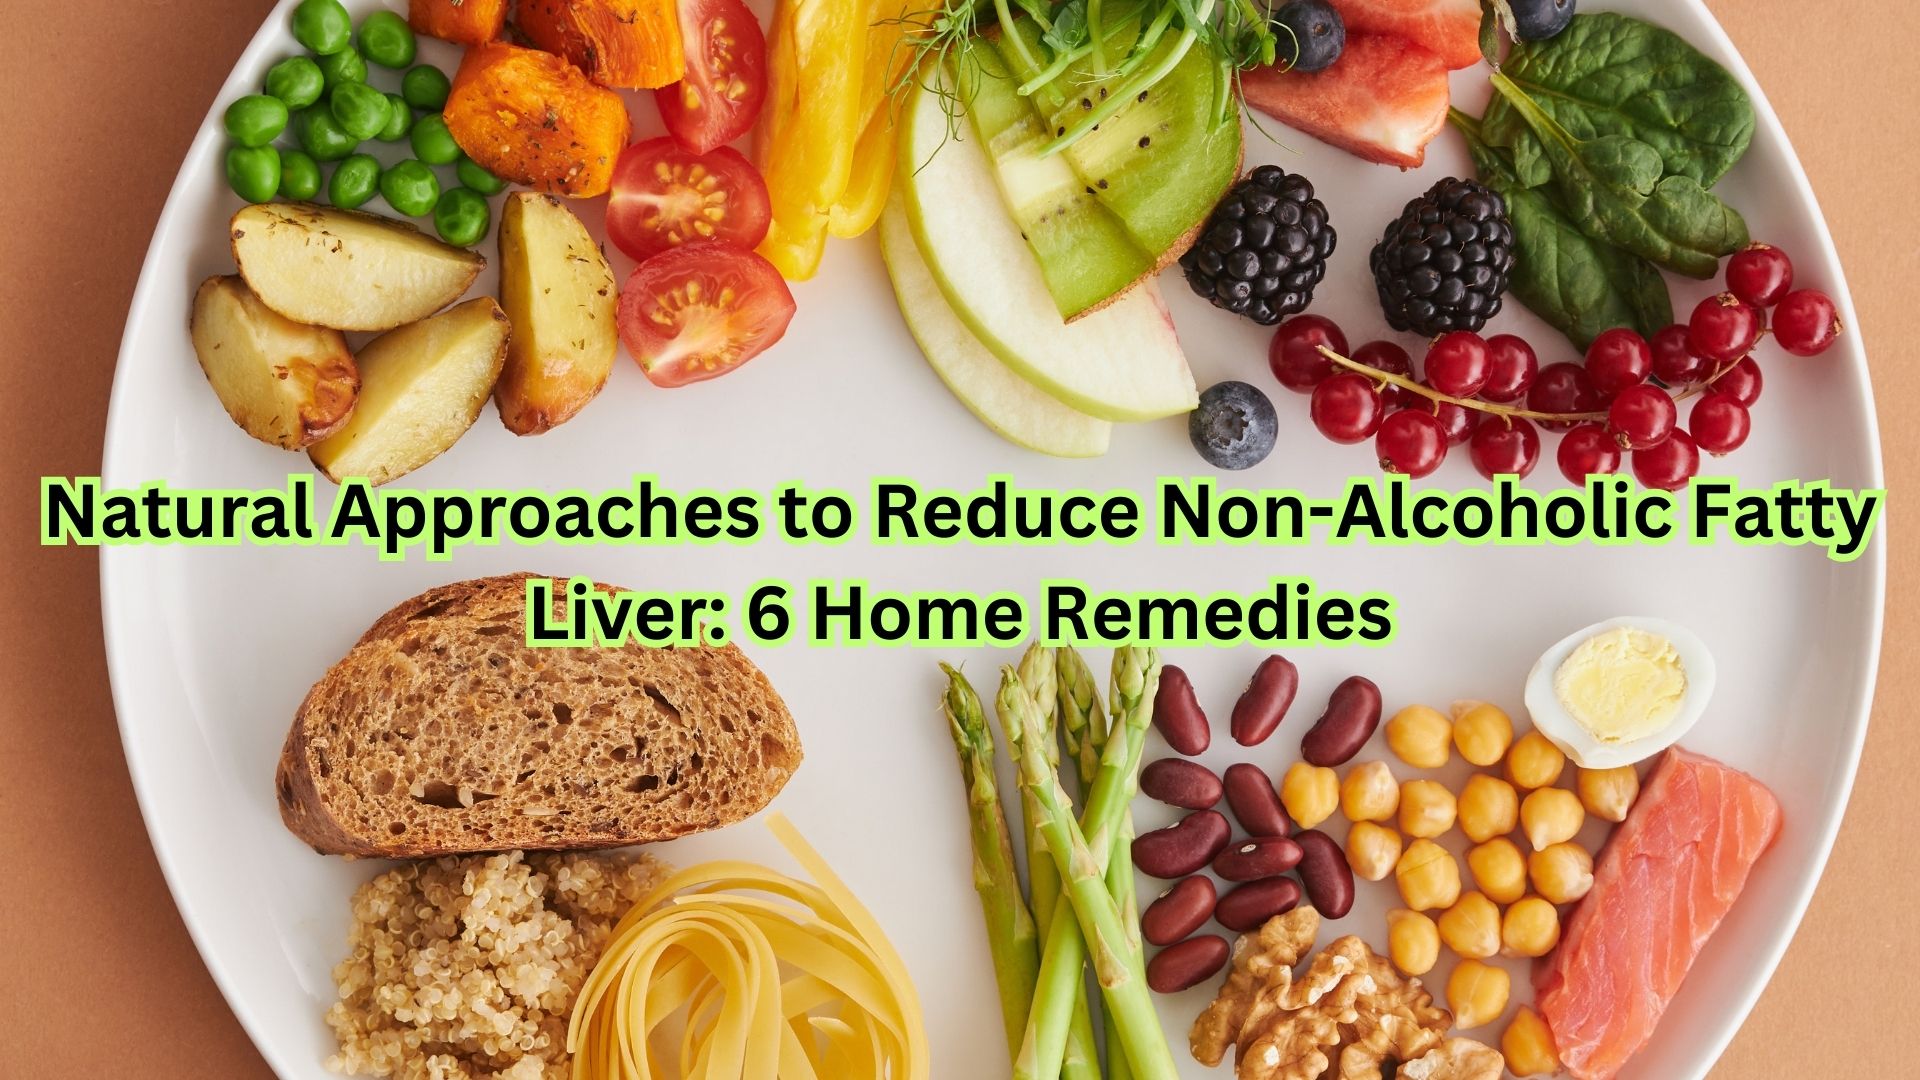 Natural Approaches to Reduce Non-Alcoholic Fatty Liver: 6 Home Remedies